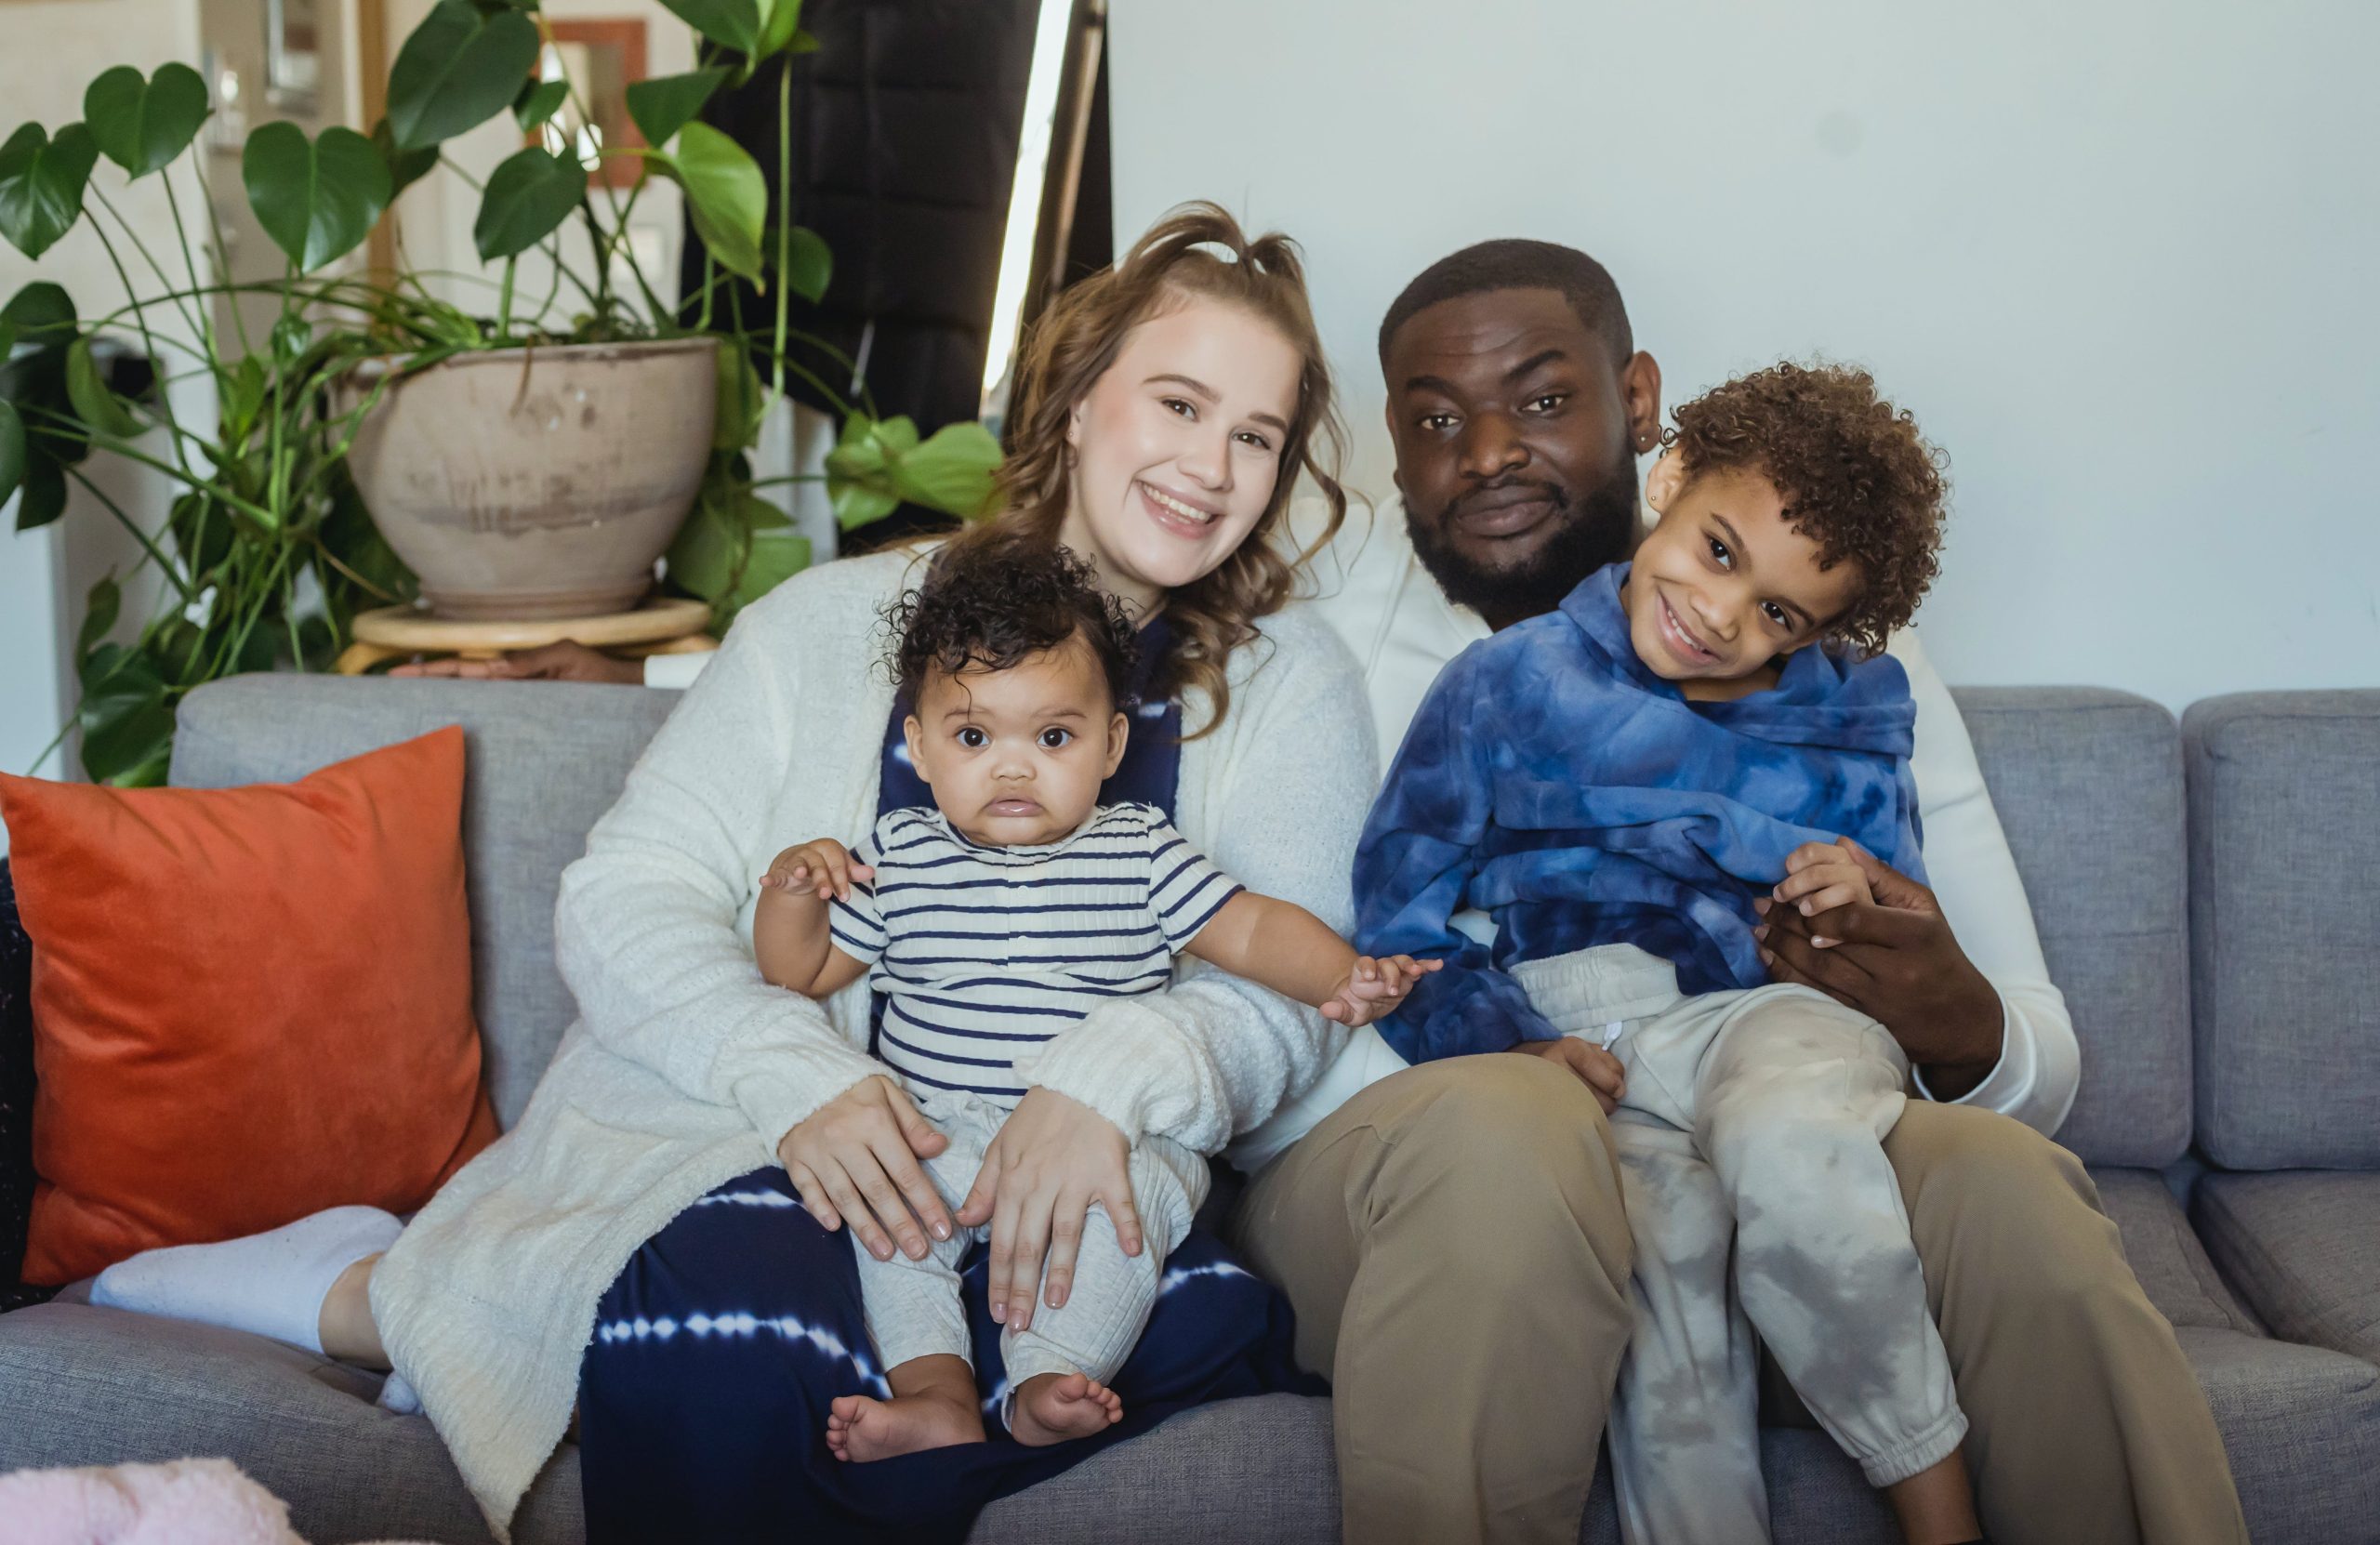 Multiracial couple in love hugging in a new home while holding keys in hands. Young multiracial family bought a new house, rent an apartment, got a mortgage